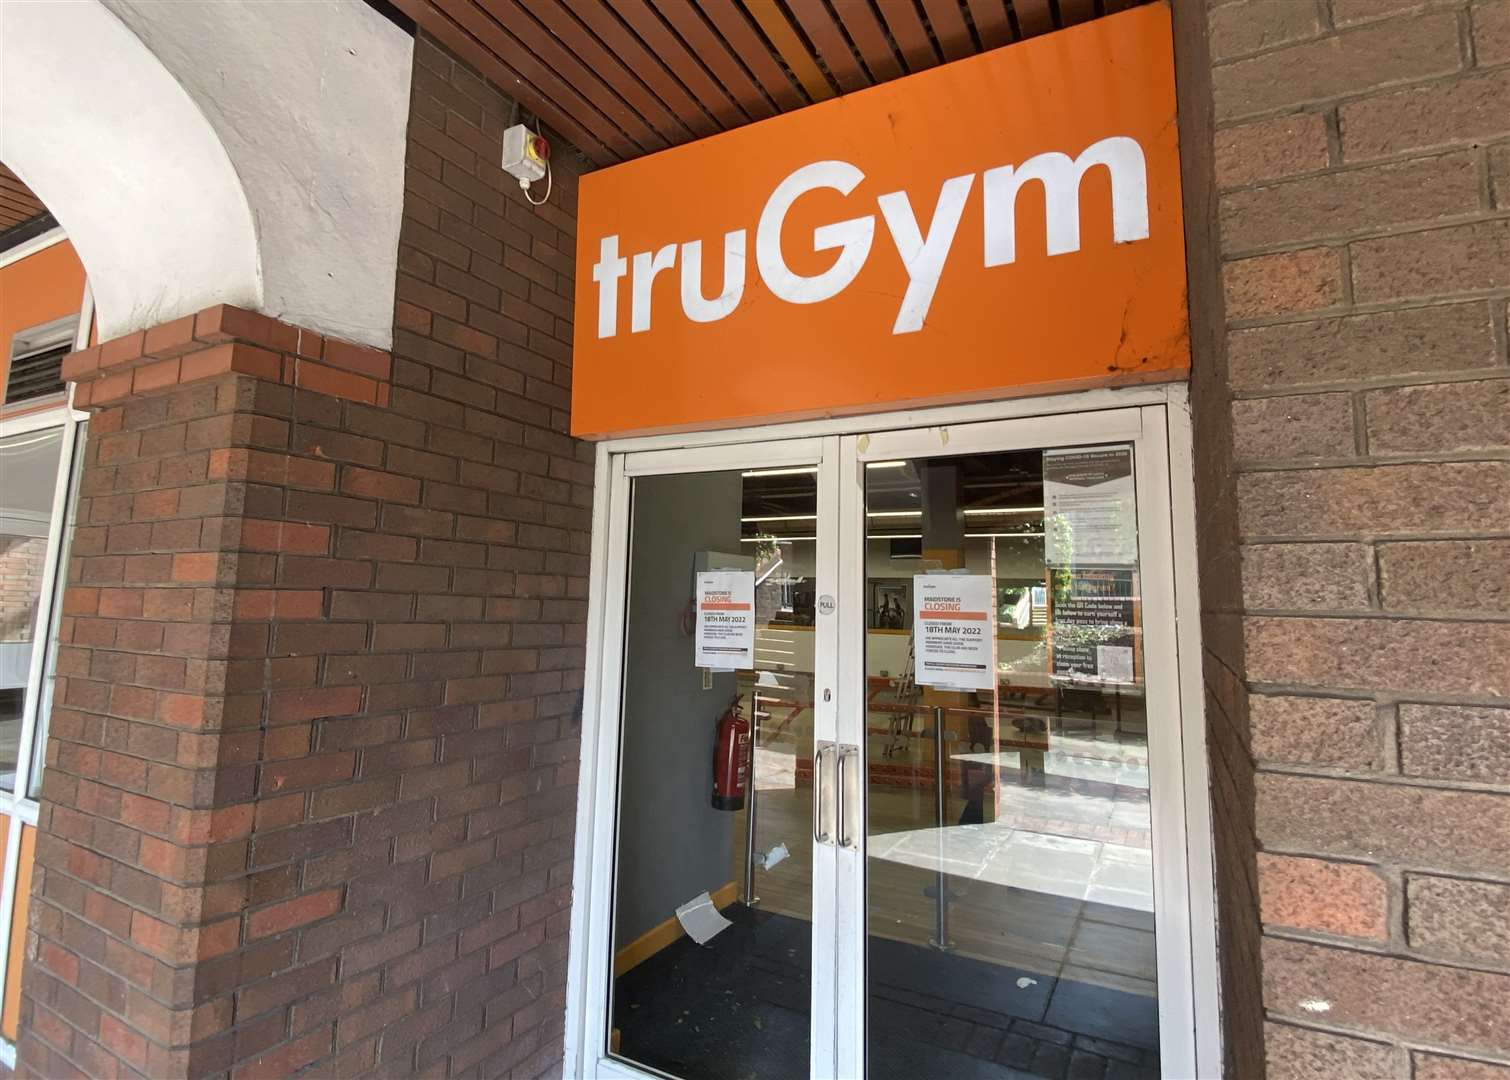 Tru Gym has only two branches in Kent, one in Maidstone and the other in Chatham